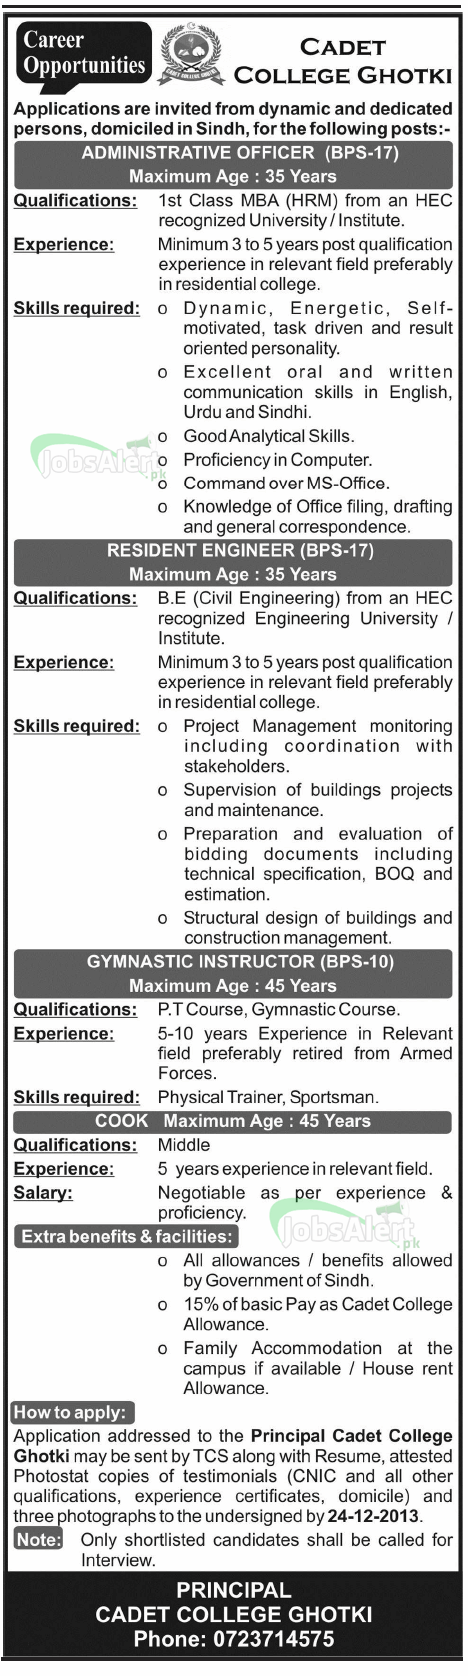 Jobs for Administrative Officer & Resident Engineer in Cadet College Ghoki